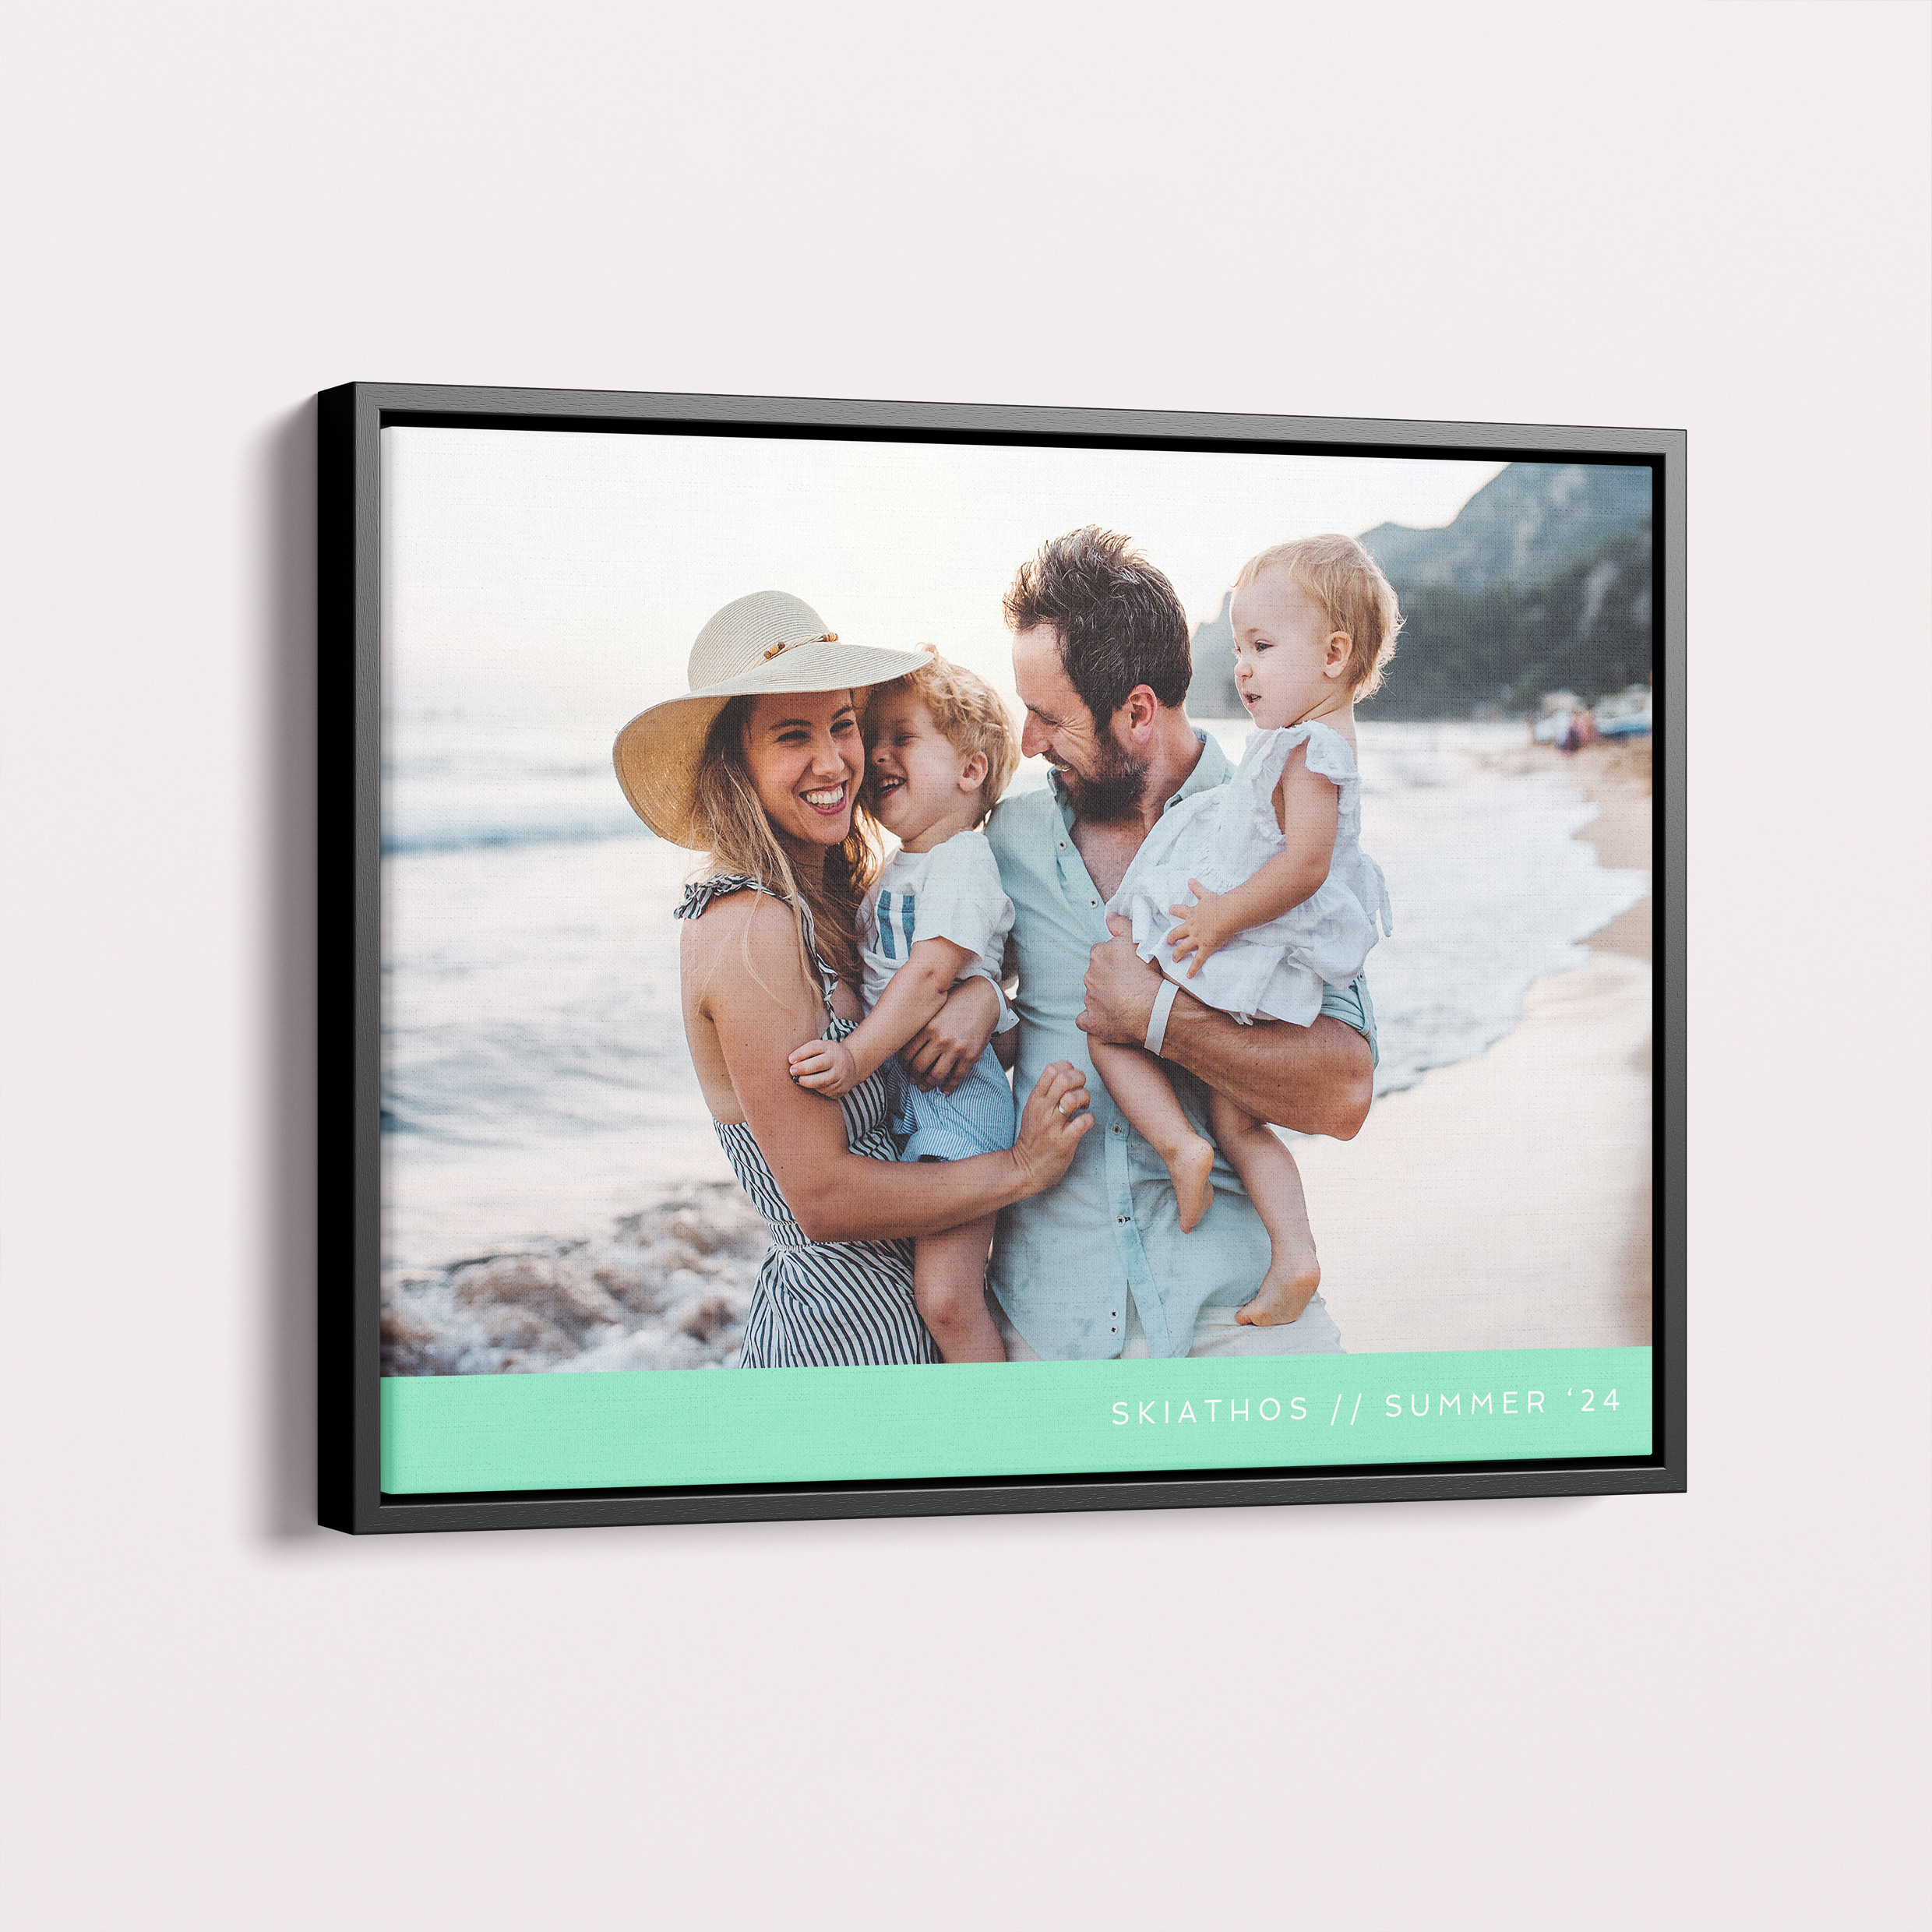 Personalised Mint Bottom Framed Photo Canvas - Preserve Memories in Style with Utterly Printable